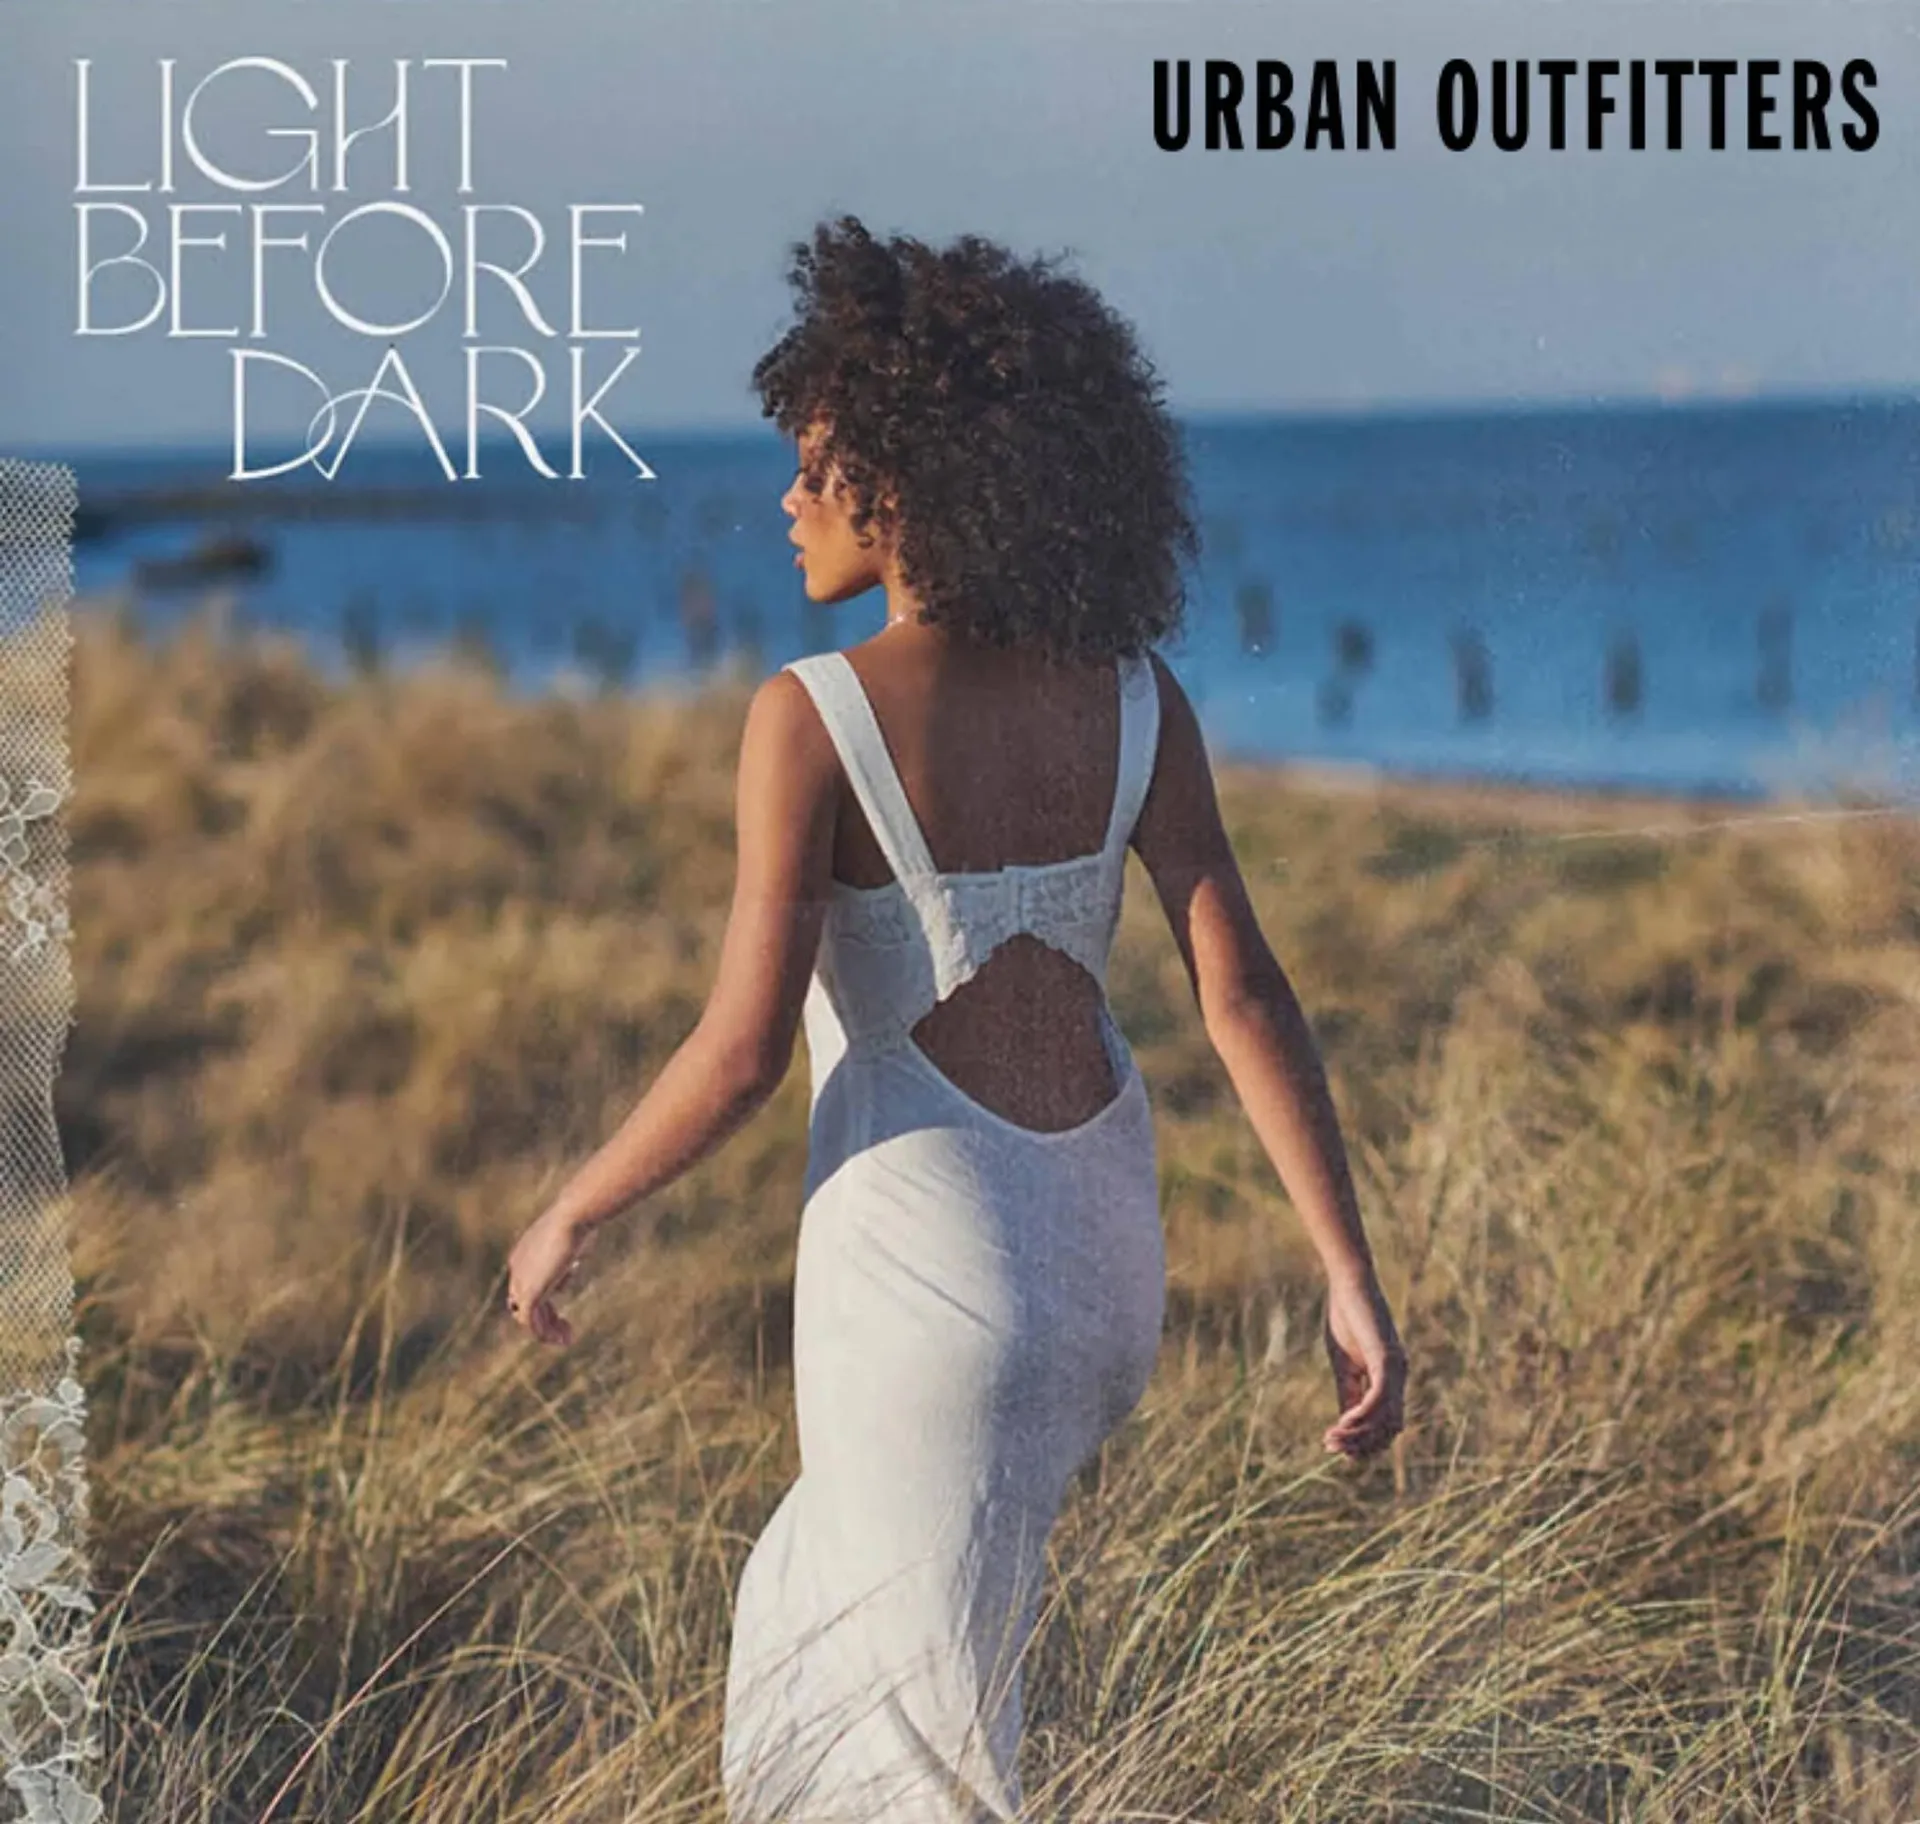 Catalogue Urban Outfitters - 1